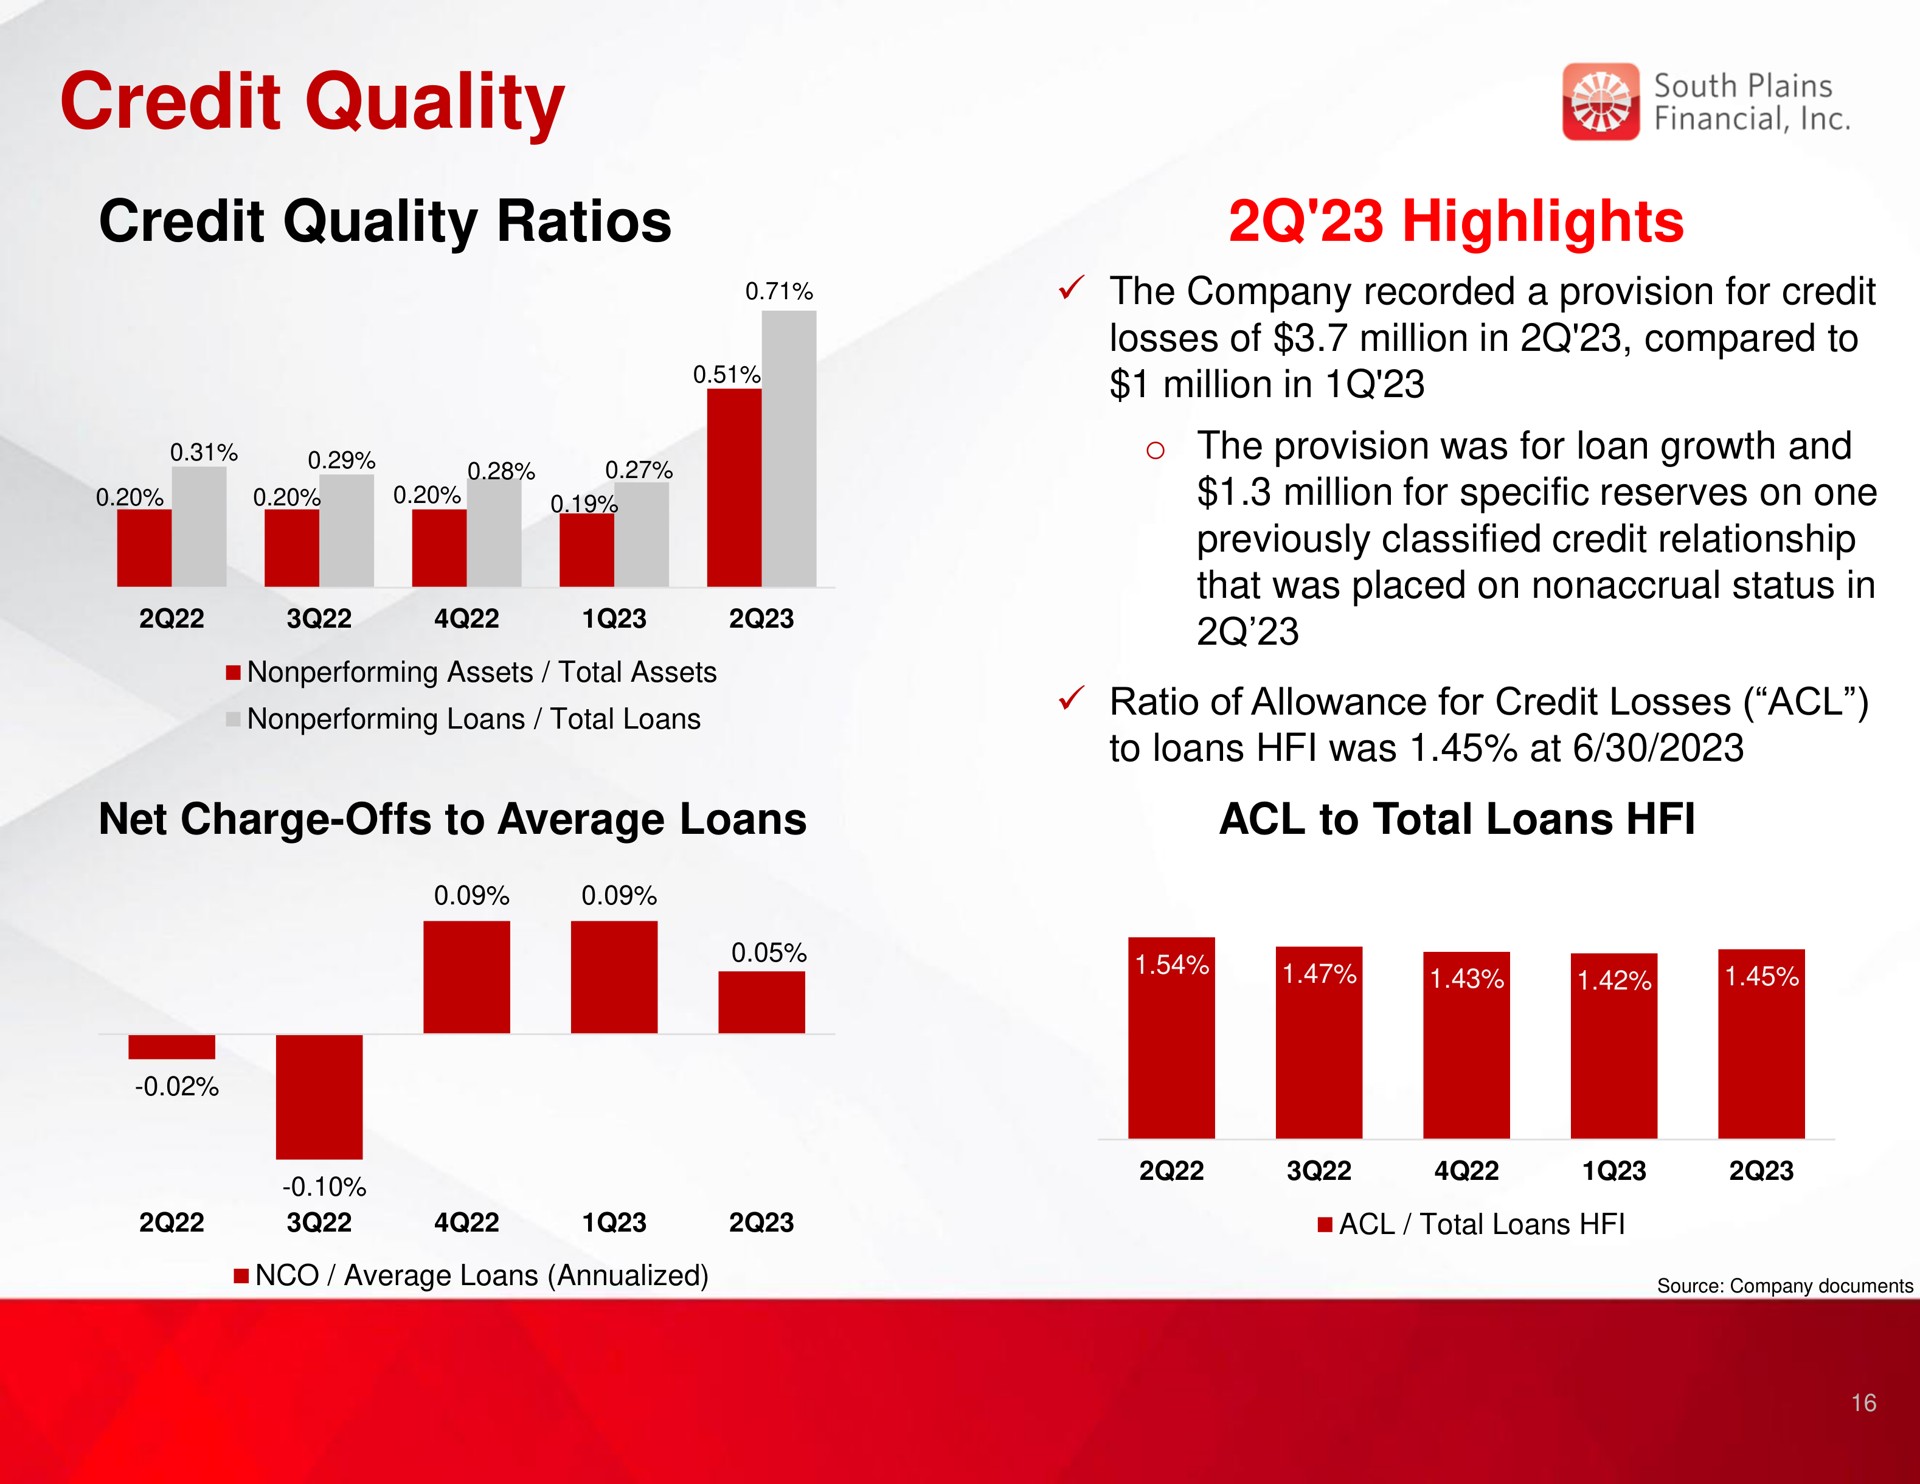 credit quality credit quality ratios highlights | South Plains Financial